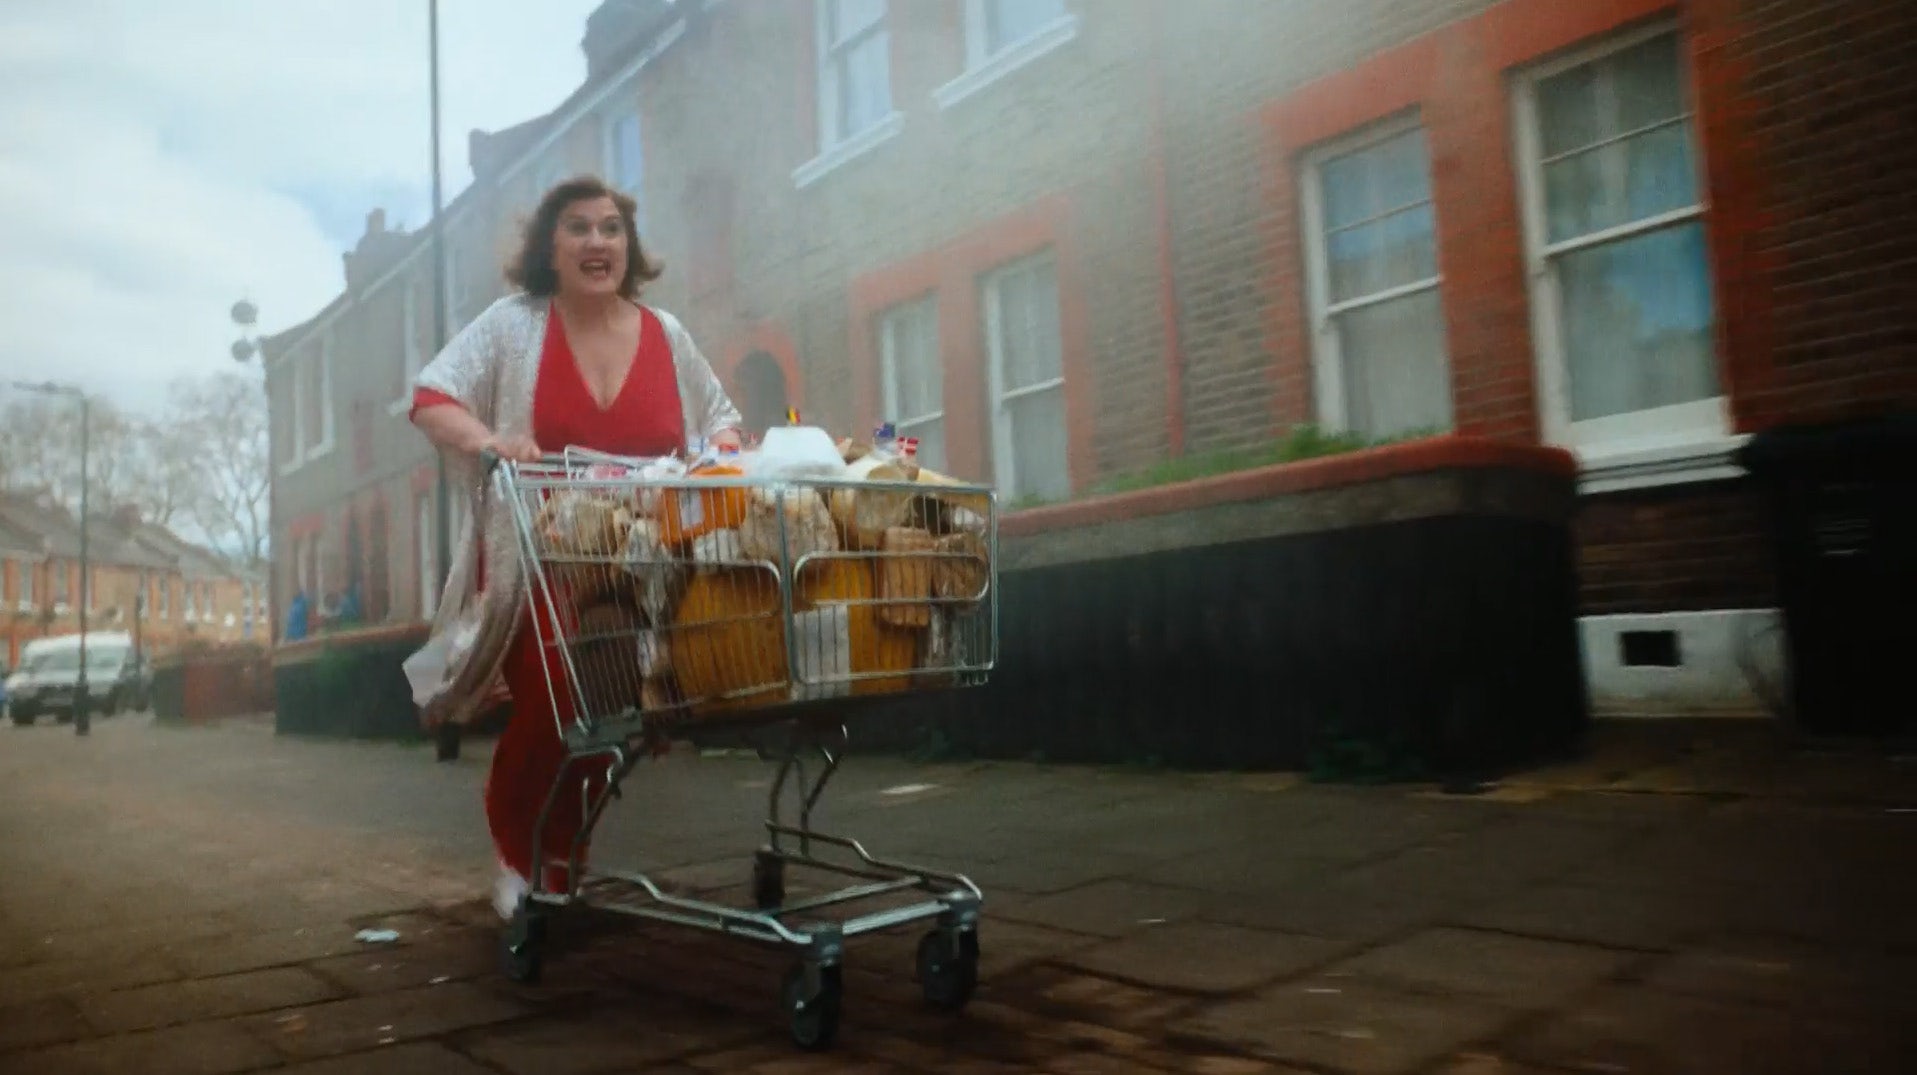 Still from BBC Eurovision 2023 ad showing a person running down a street pushing a trolley